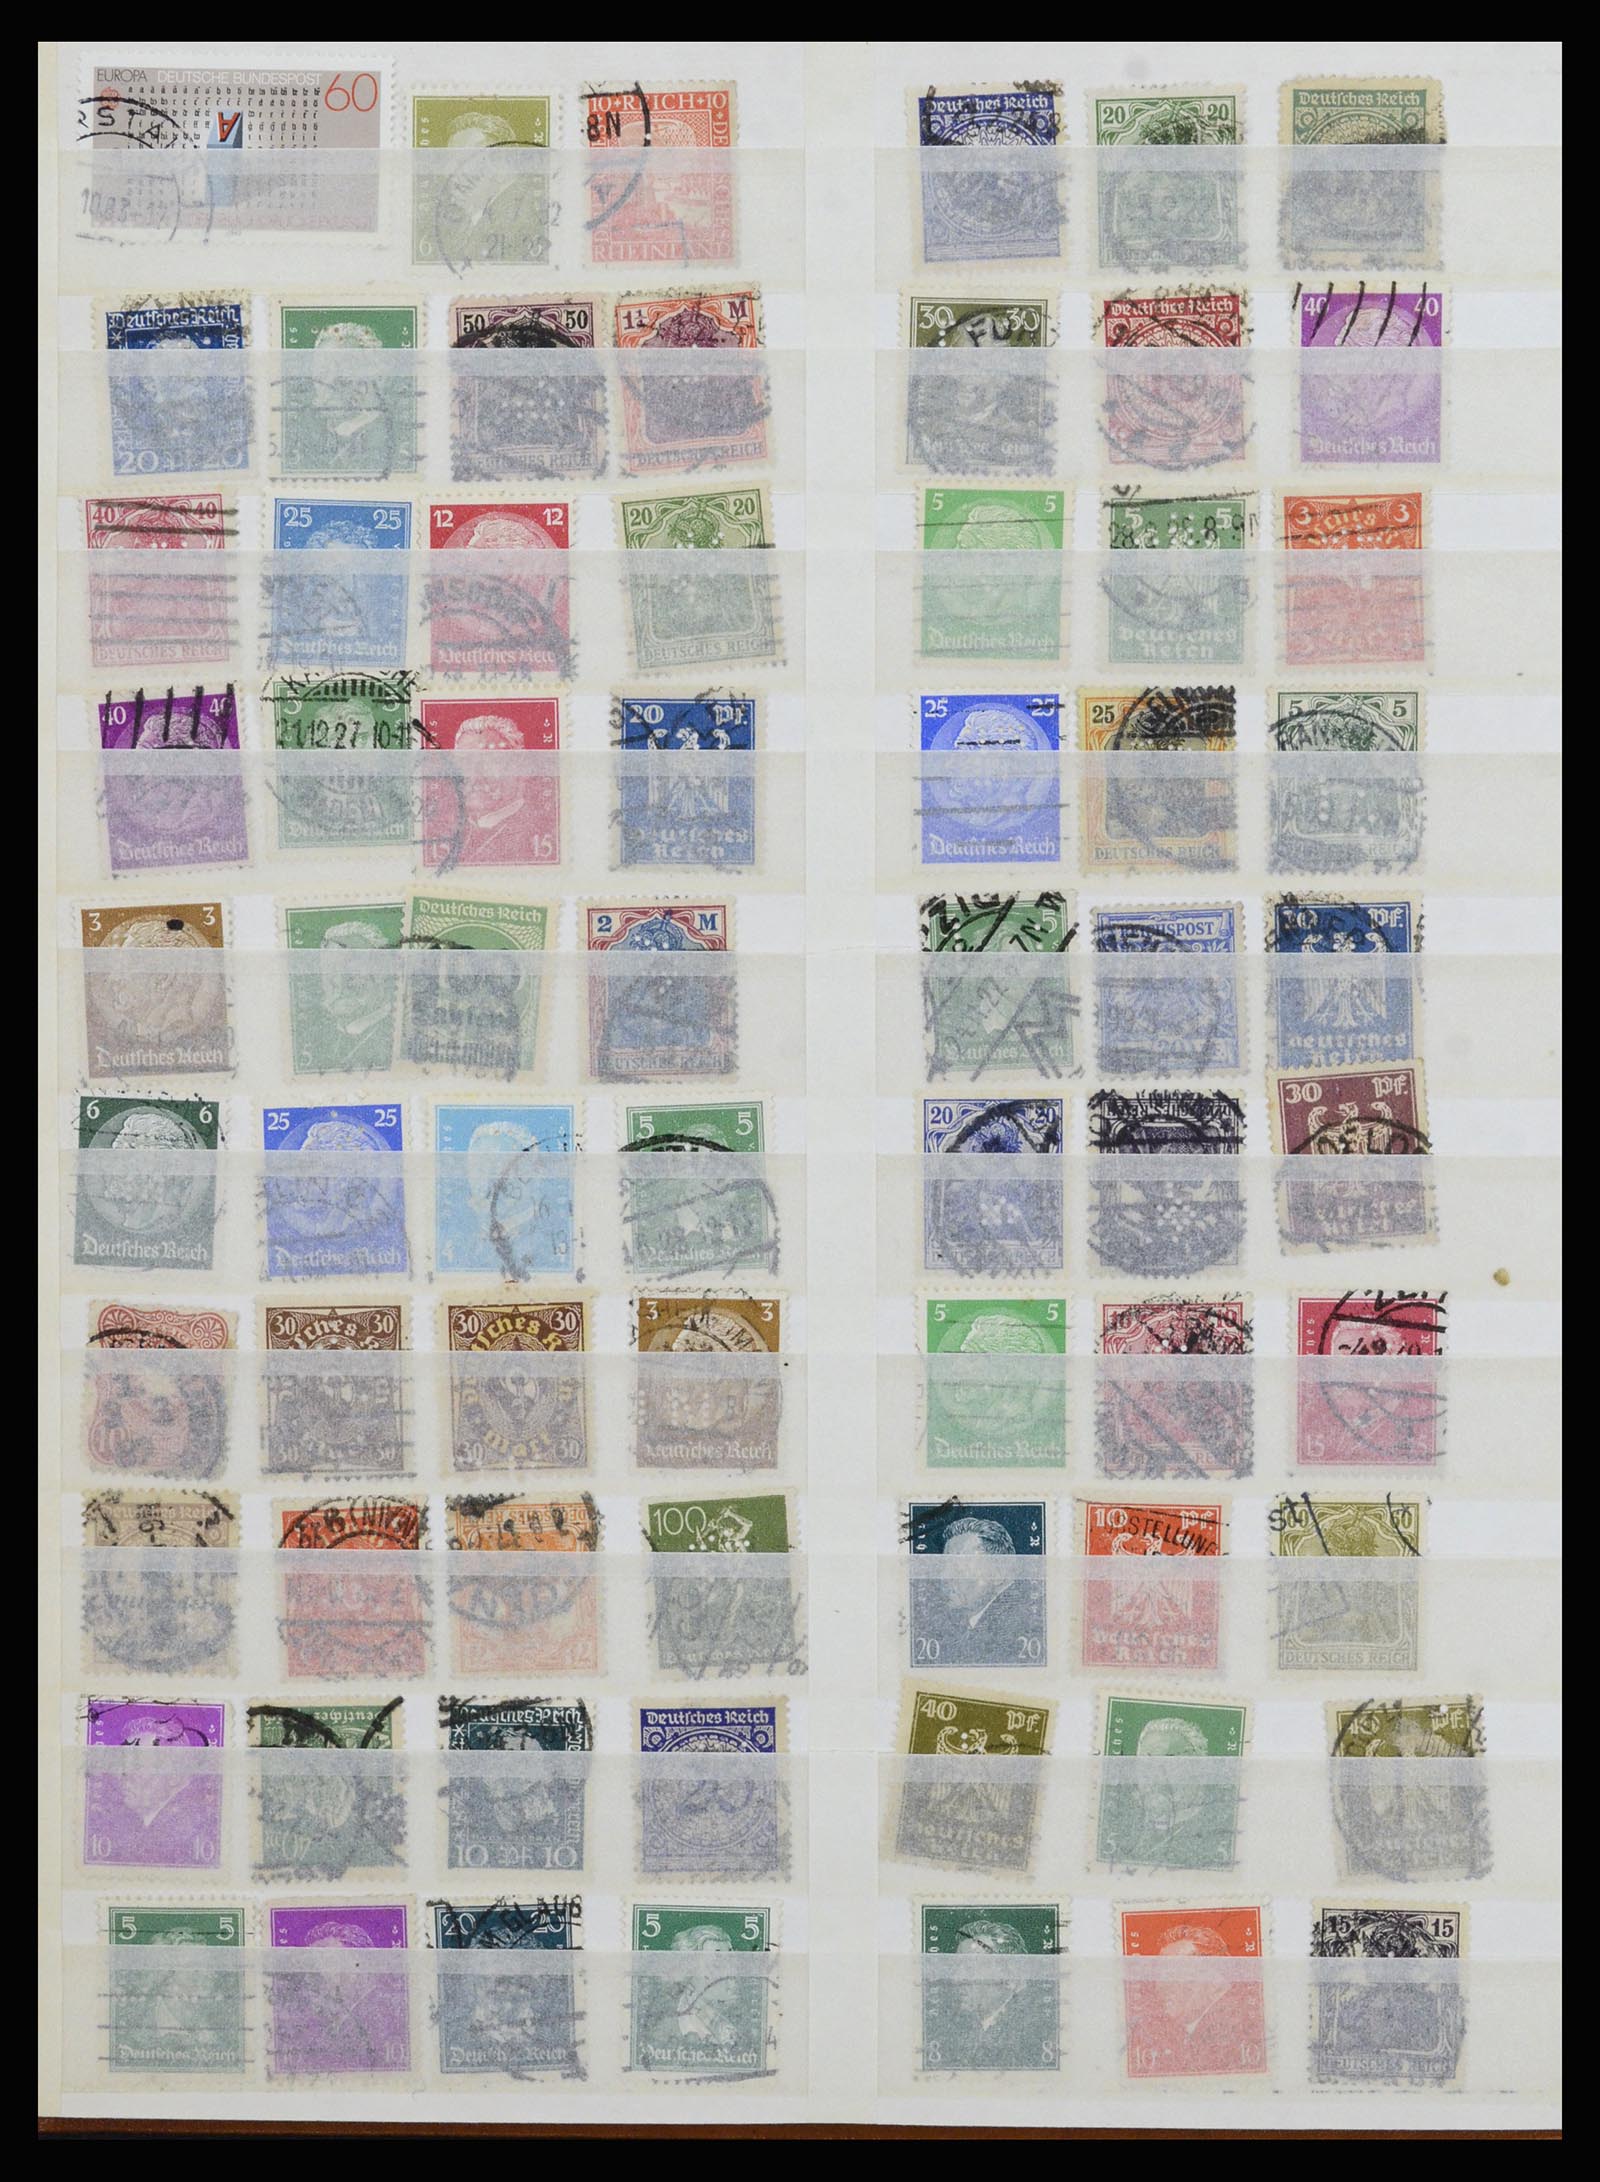 37057 085 - Stamp collection 37057 World perfins 1880-1950.